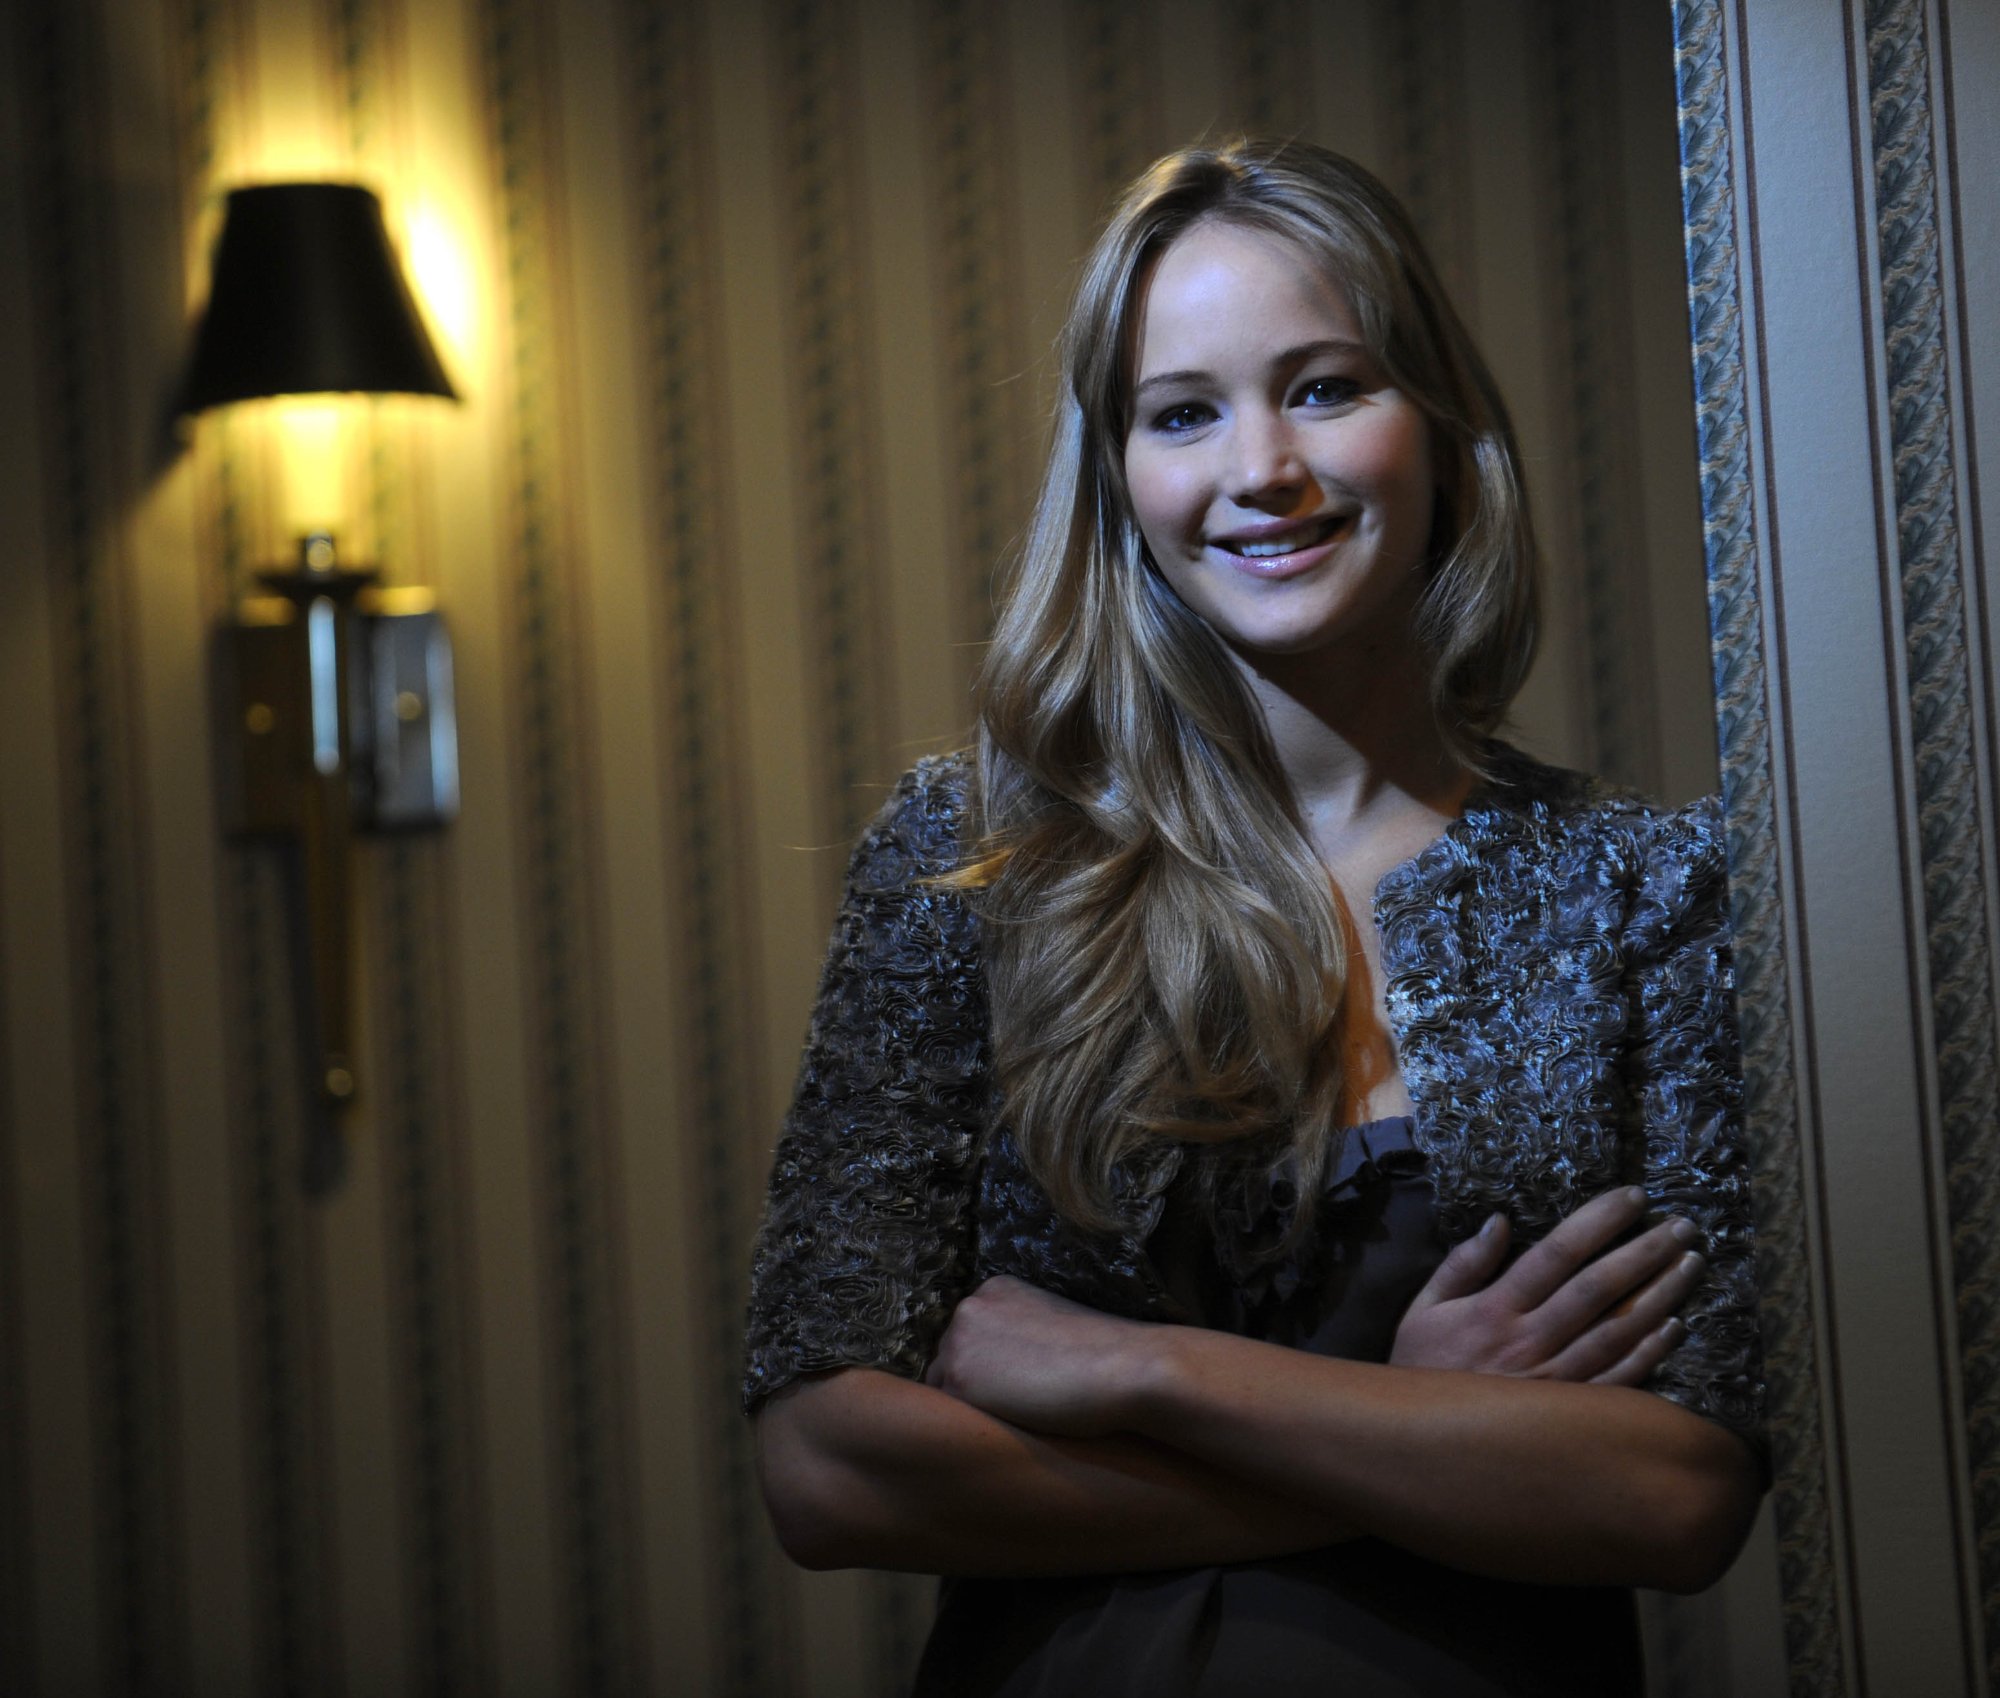 'Winter's Bone' star Jennifer Lawrence leaning against a wall with a lamp behind her